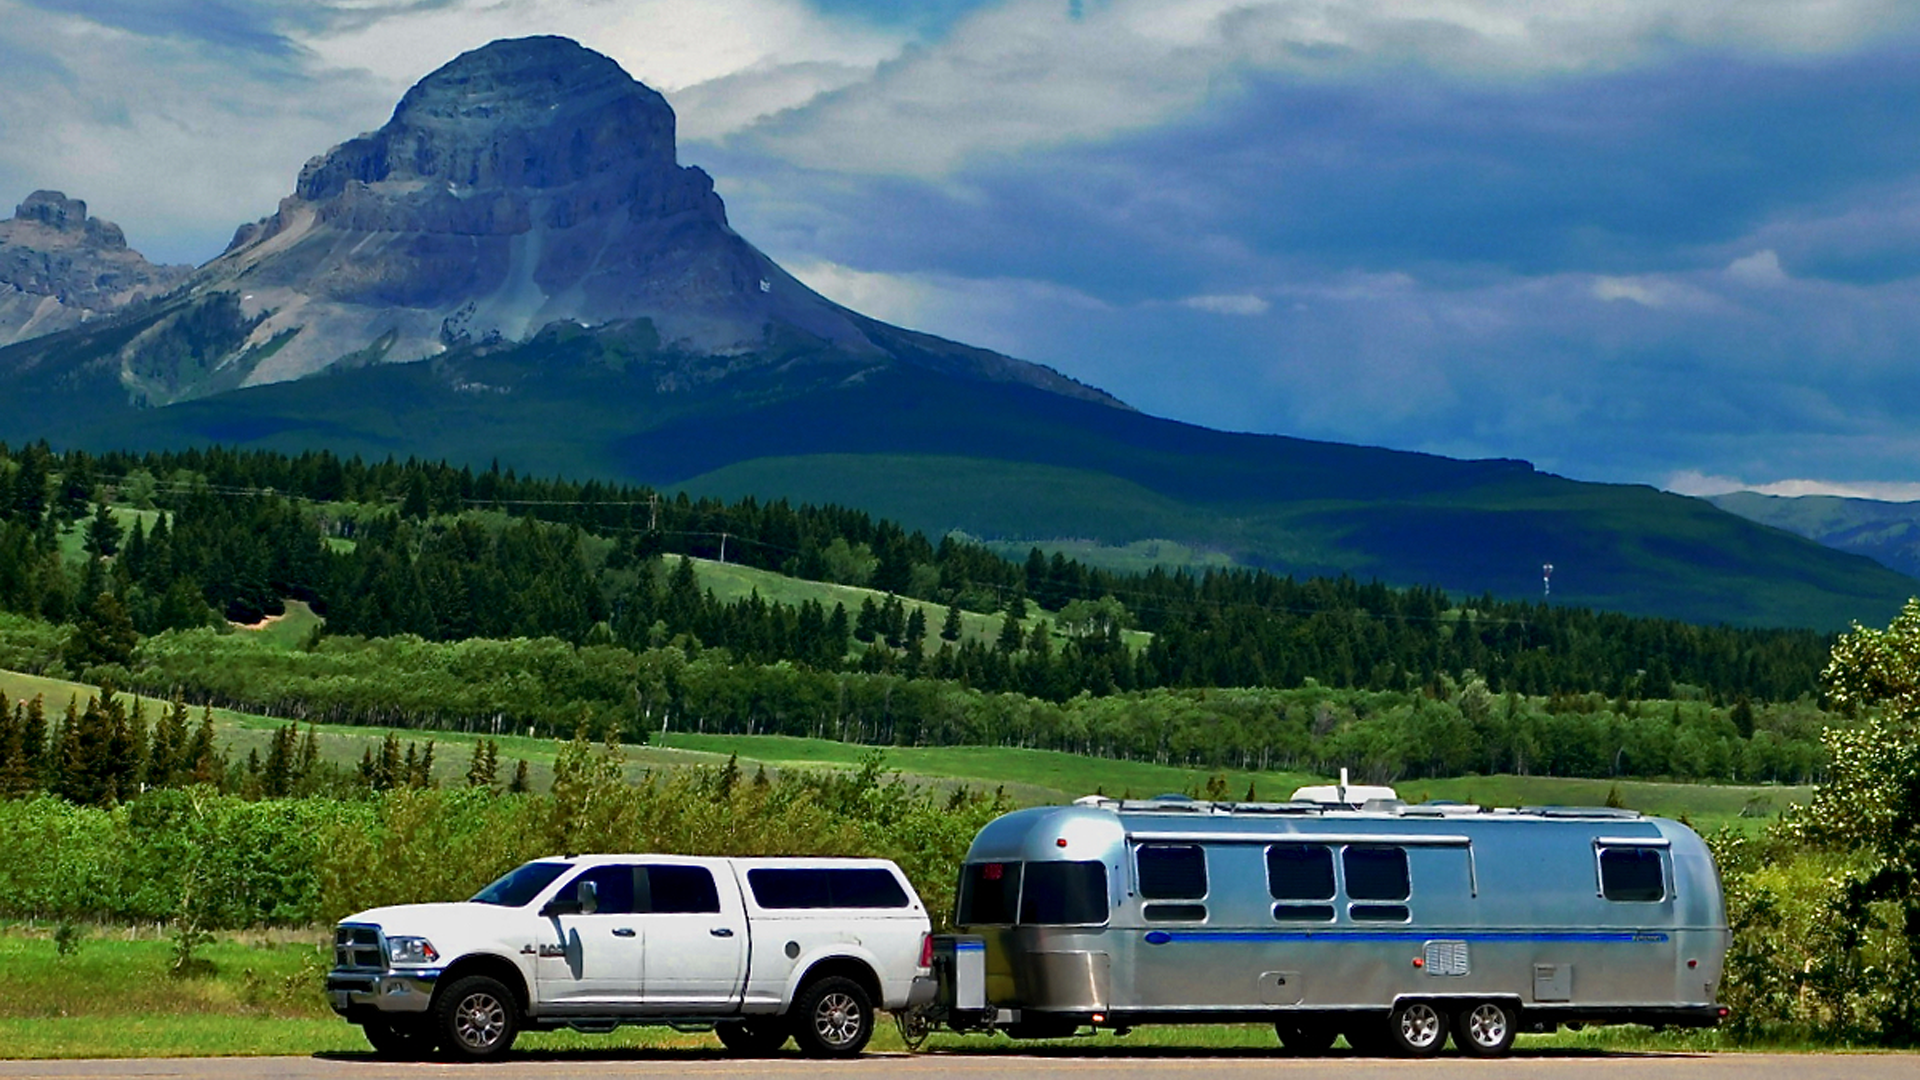 An airstream classic travel trailer being towed by a truck through a National Park with mountains in the background.